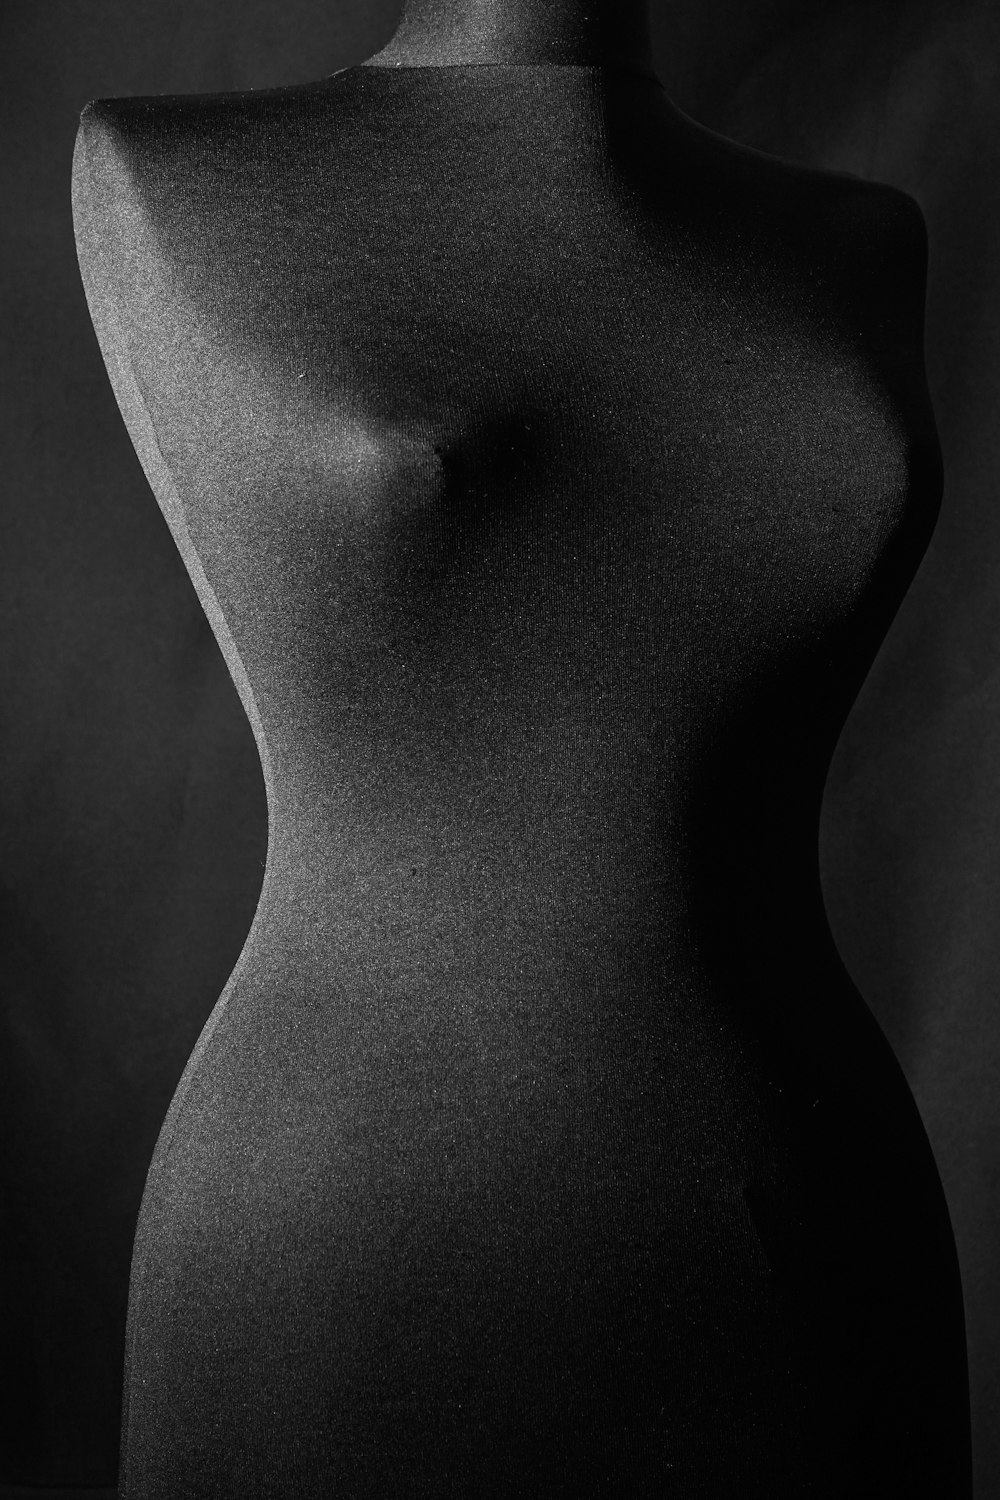 womans breast in grayscale